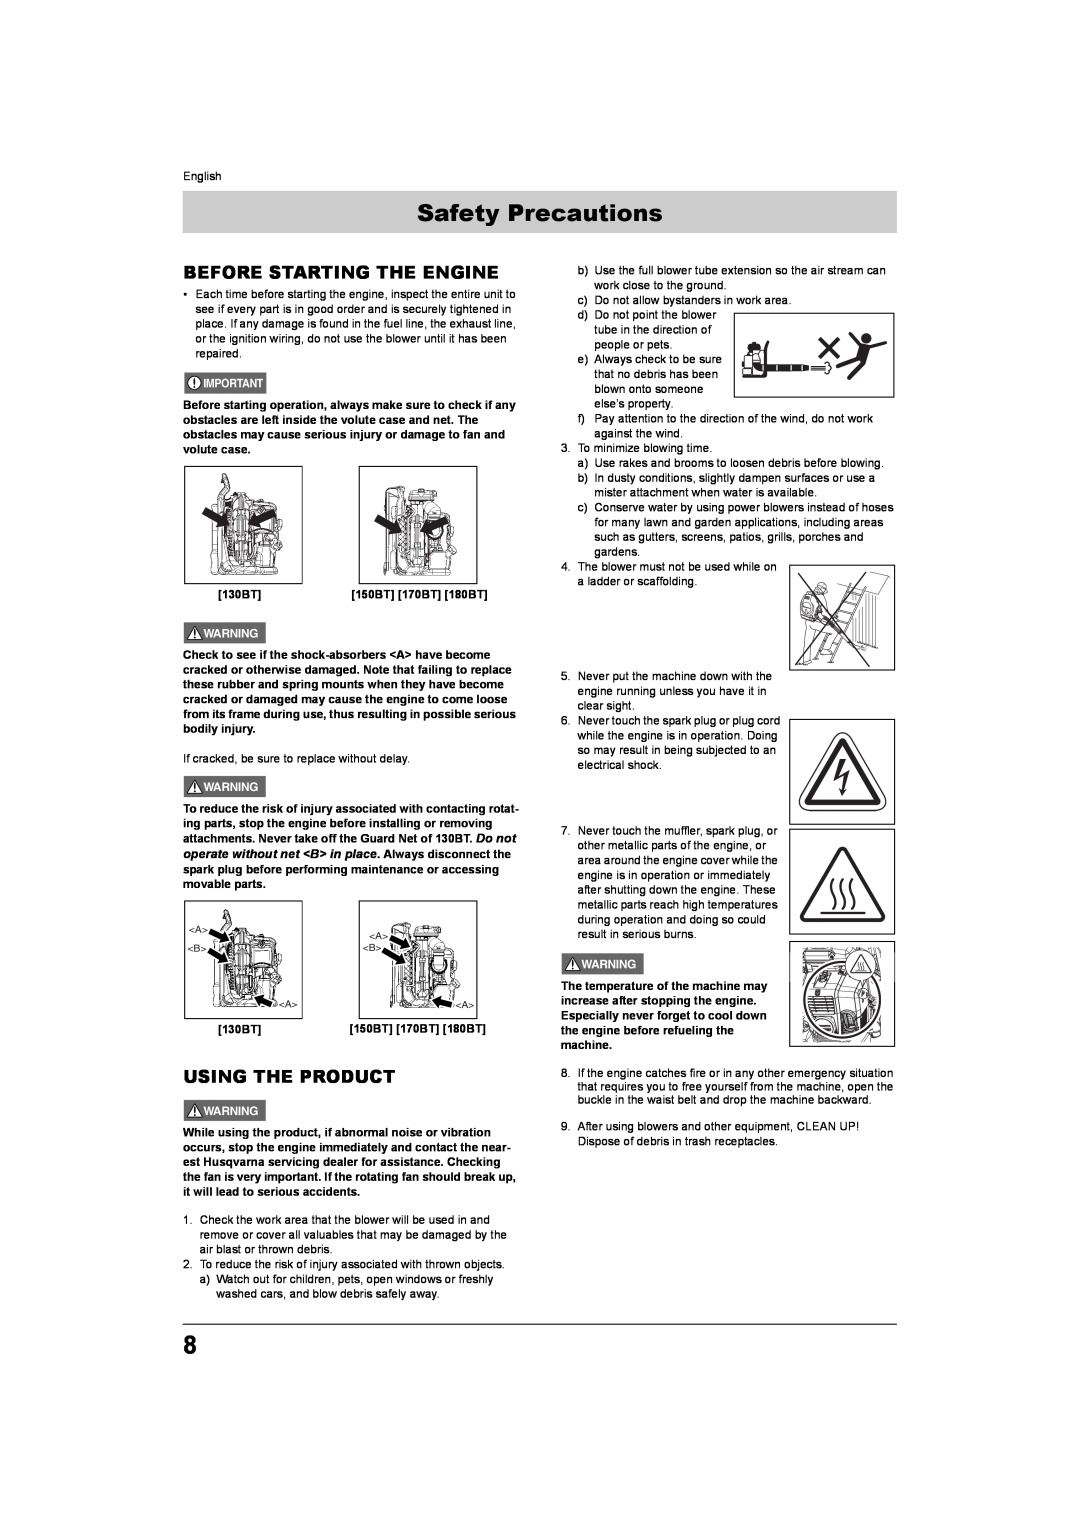 Husqvarna 180BT, 150BT manual Safety Precautions, Before Starting The Engine, Using The Product 